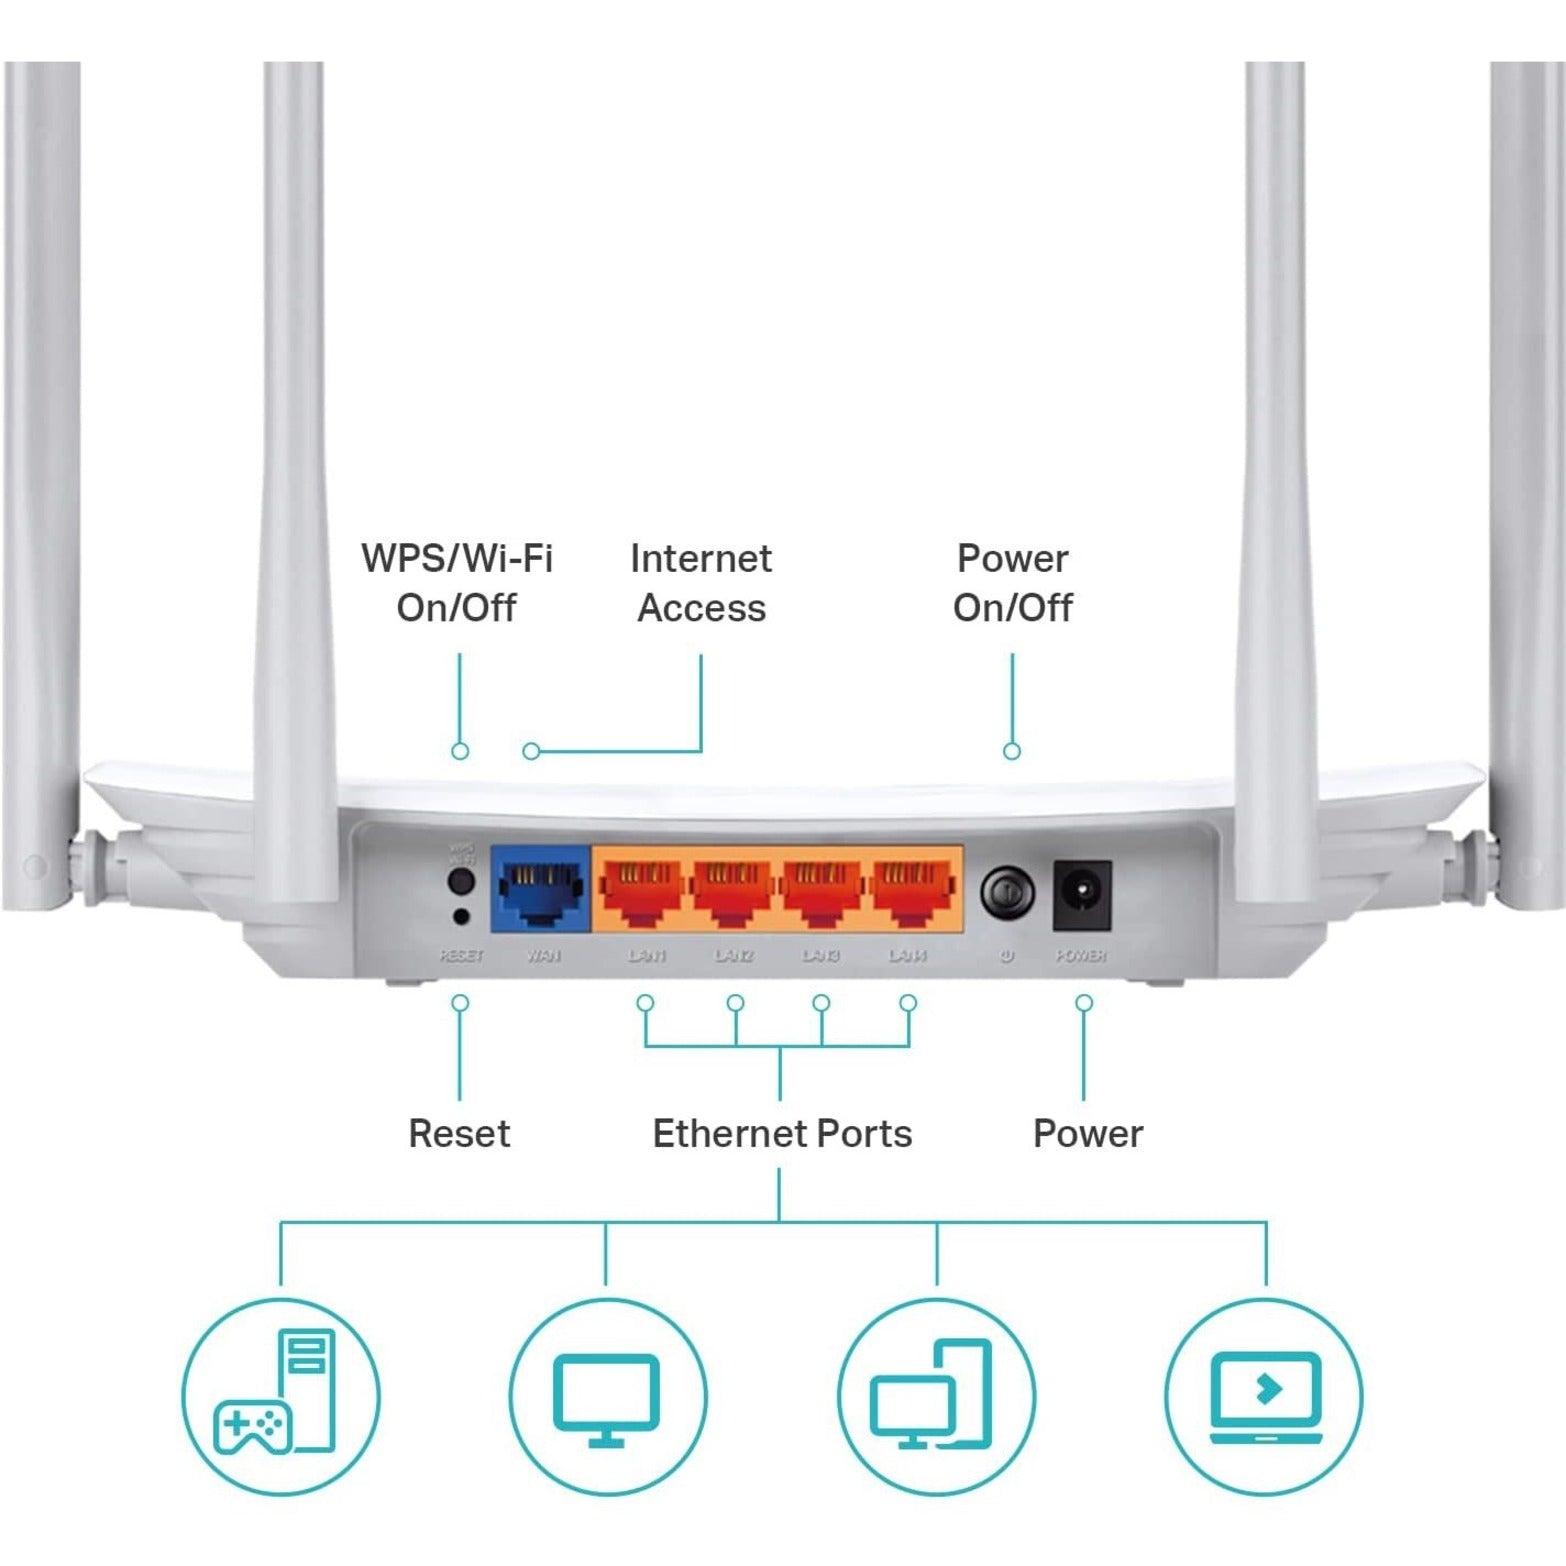 TP-Link ARCHER A54 AC1200 Dual Band Wi-Fi Router, Fast Ethernet, 150 MB/s